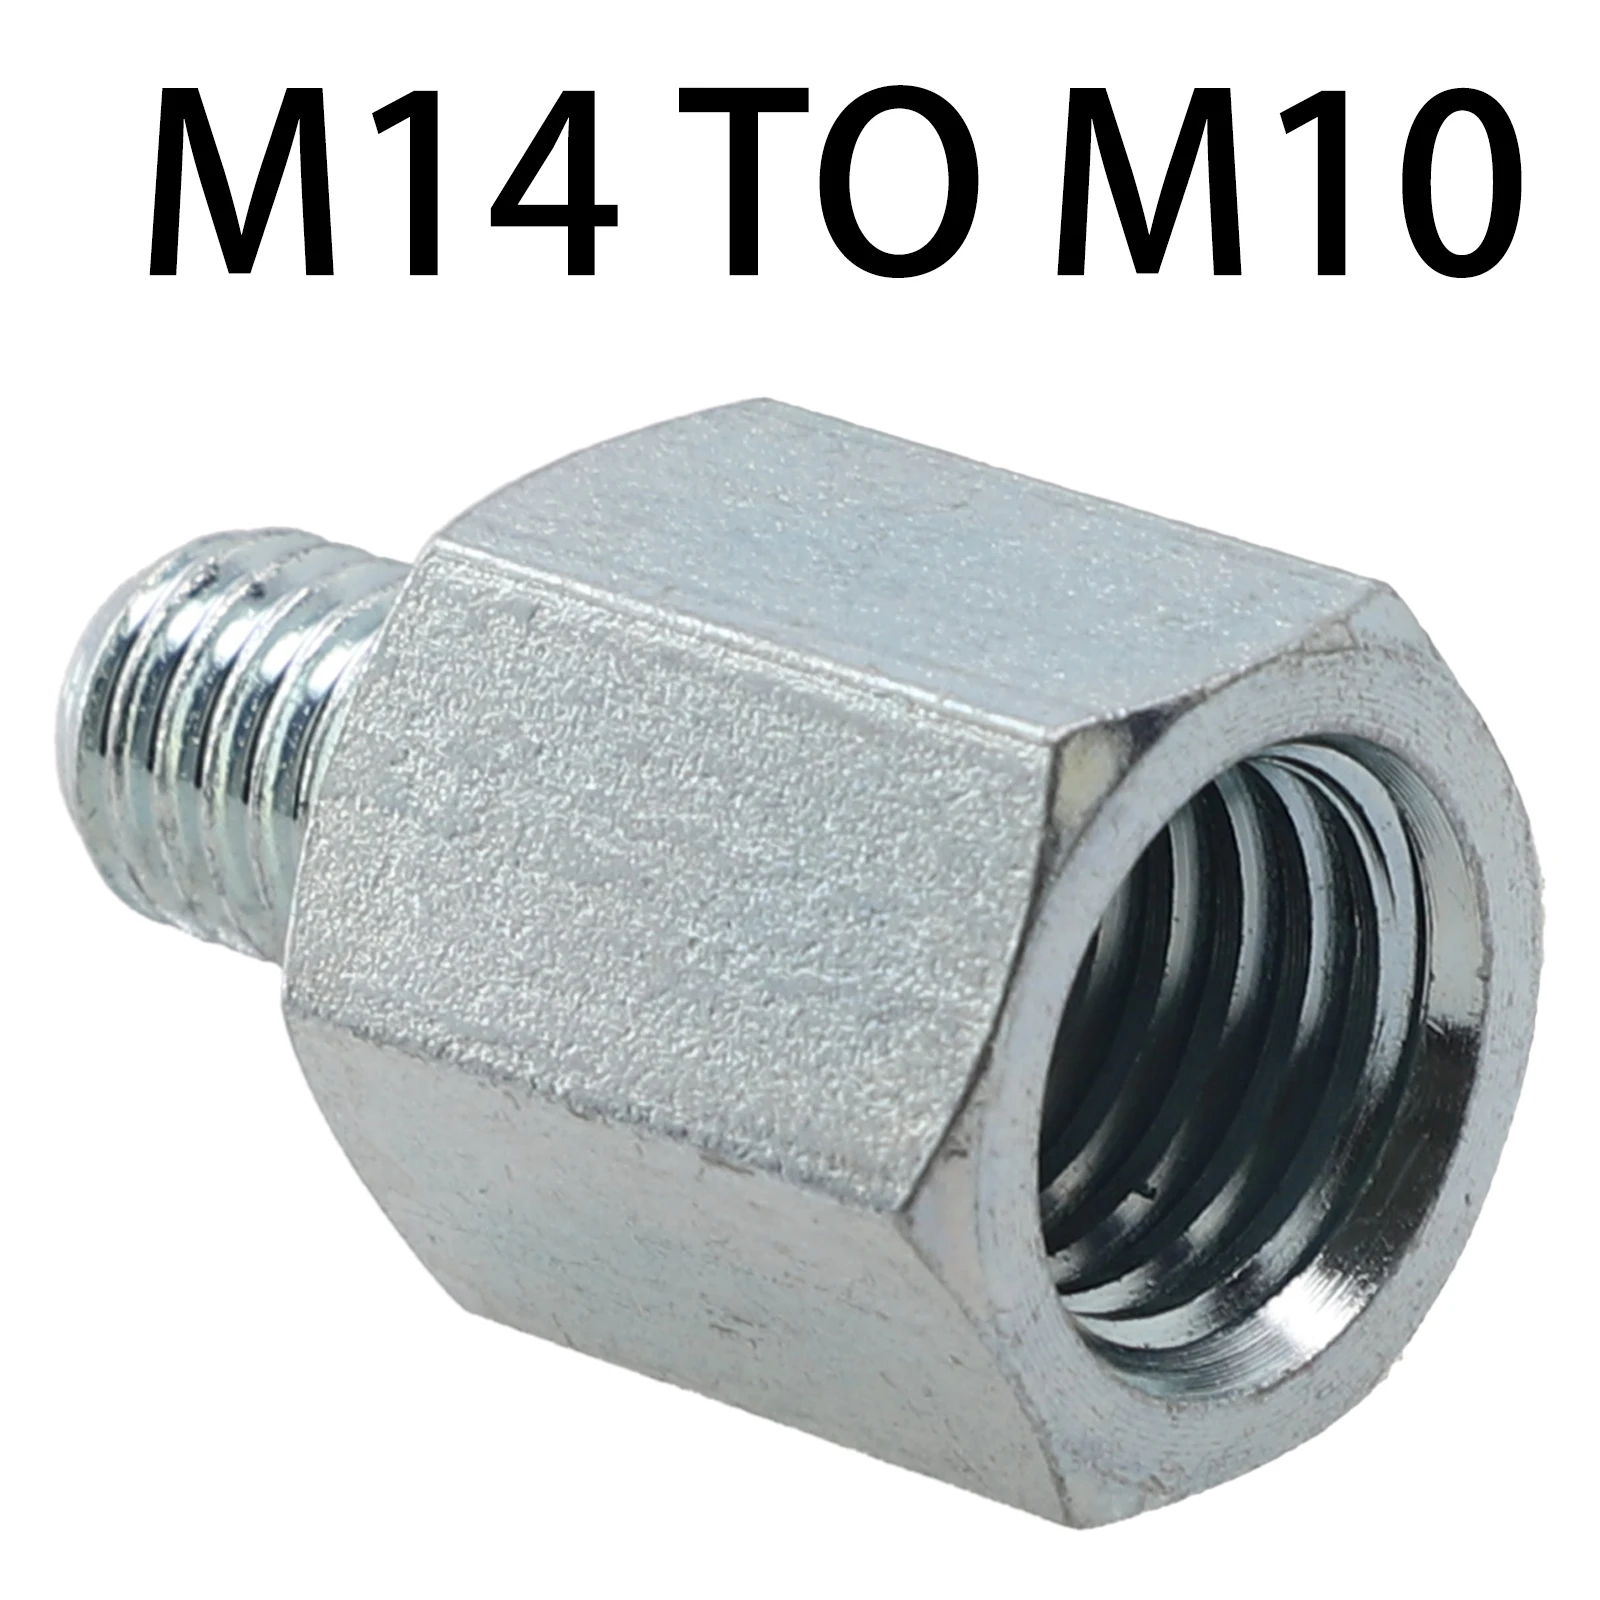 Angle Grinder Thread Adapter Connector Converter For Angle Grinder M10 To M14 M14 To M10 M14 To 5/8 -11 5/8 -11to M14 M16 To M14